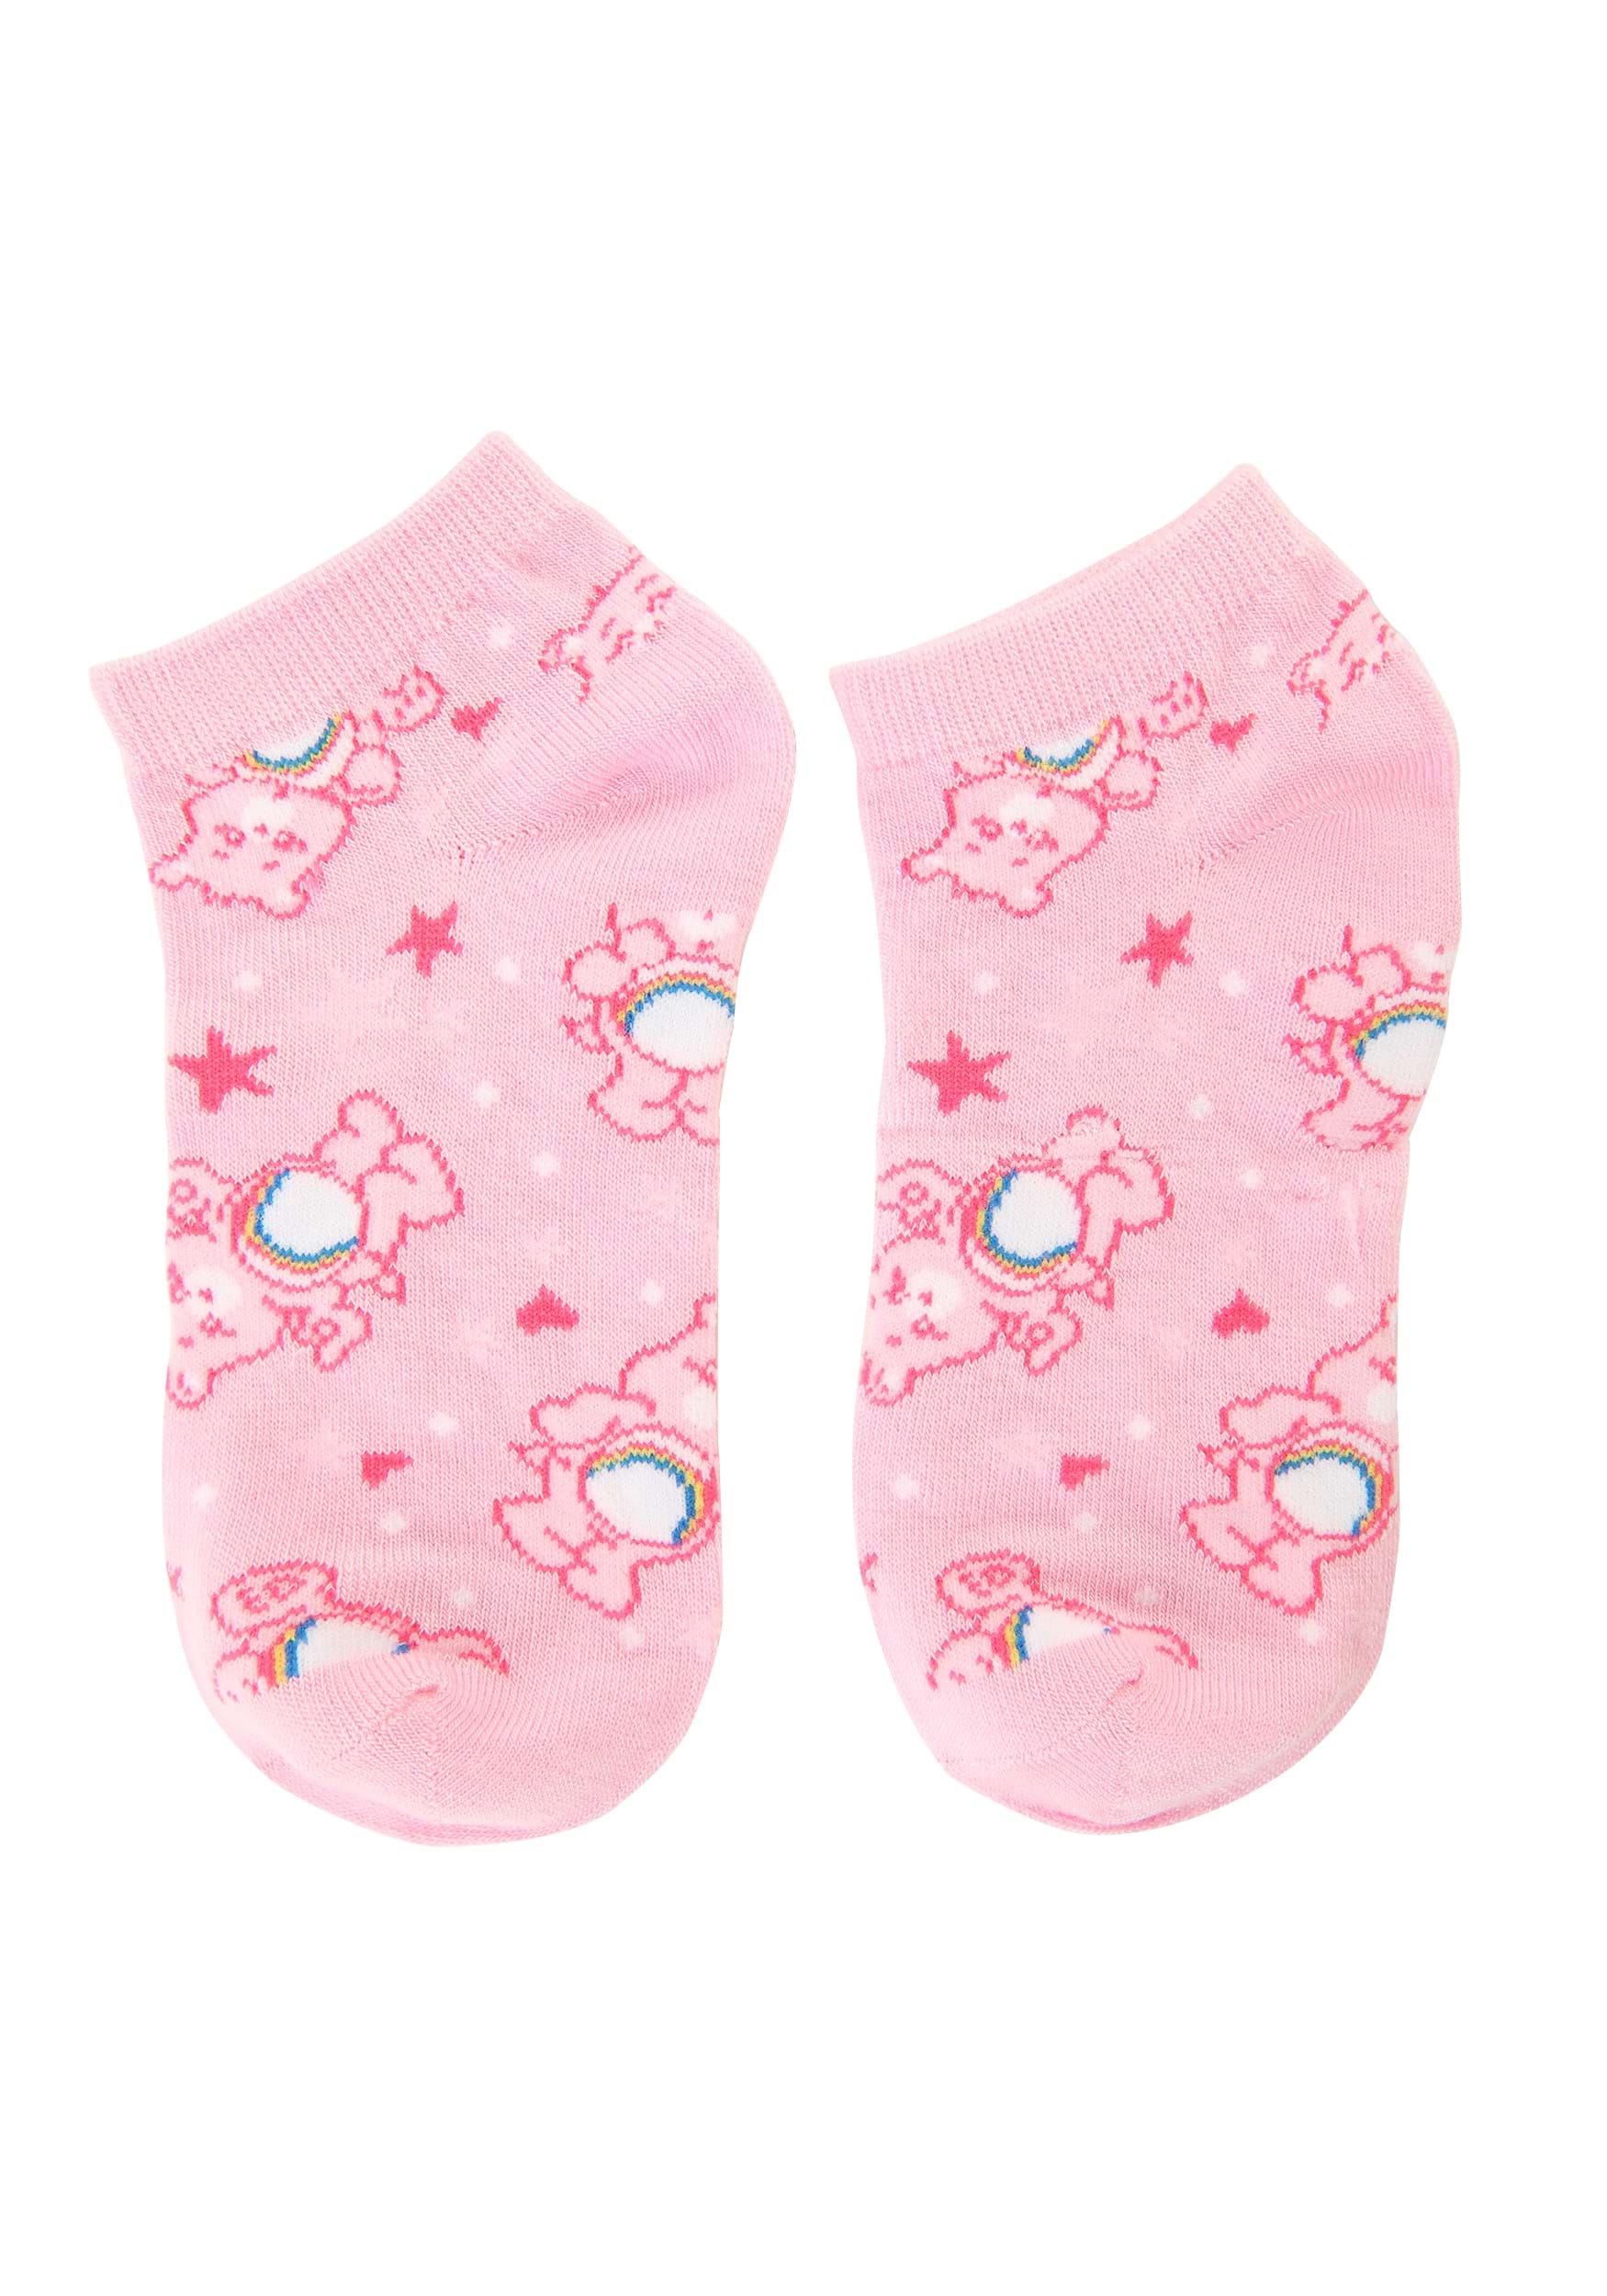 NEW  ~~CARE BEARS ~~ GIRLS  BLUE  FEATHER  SOCKS  ADULT  SIZE 9-11 